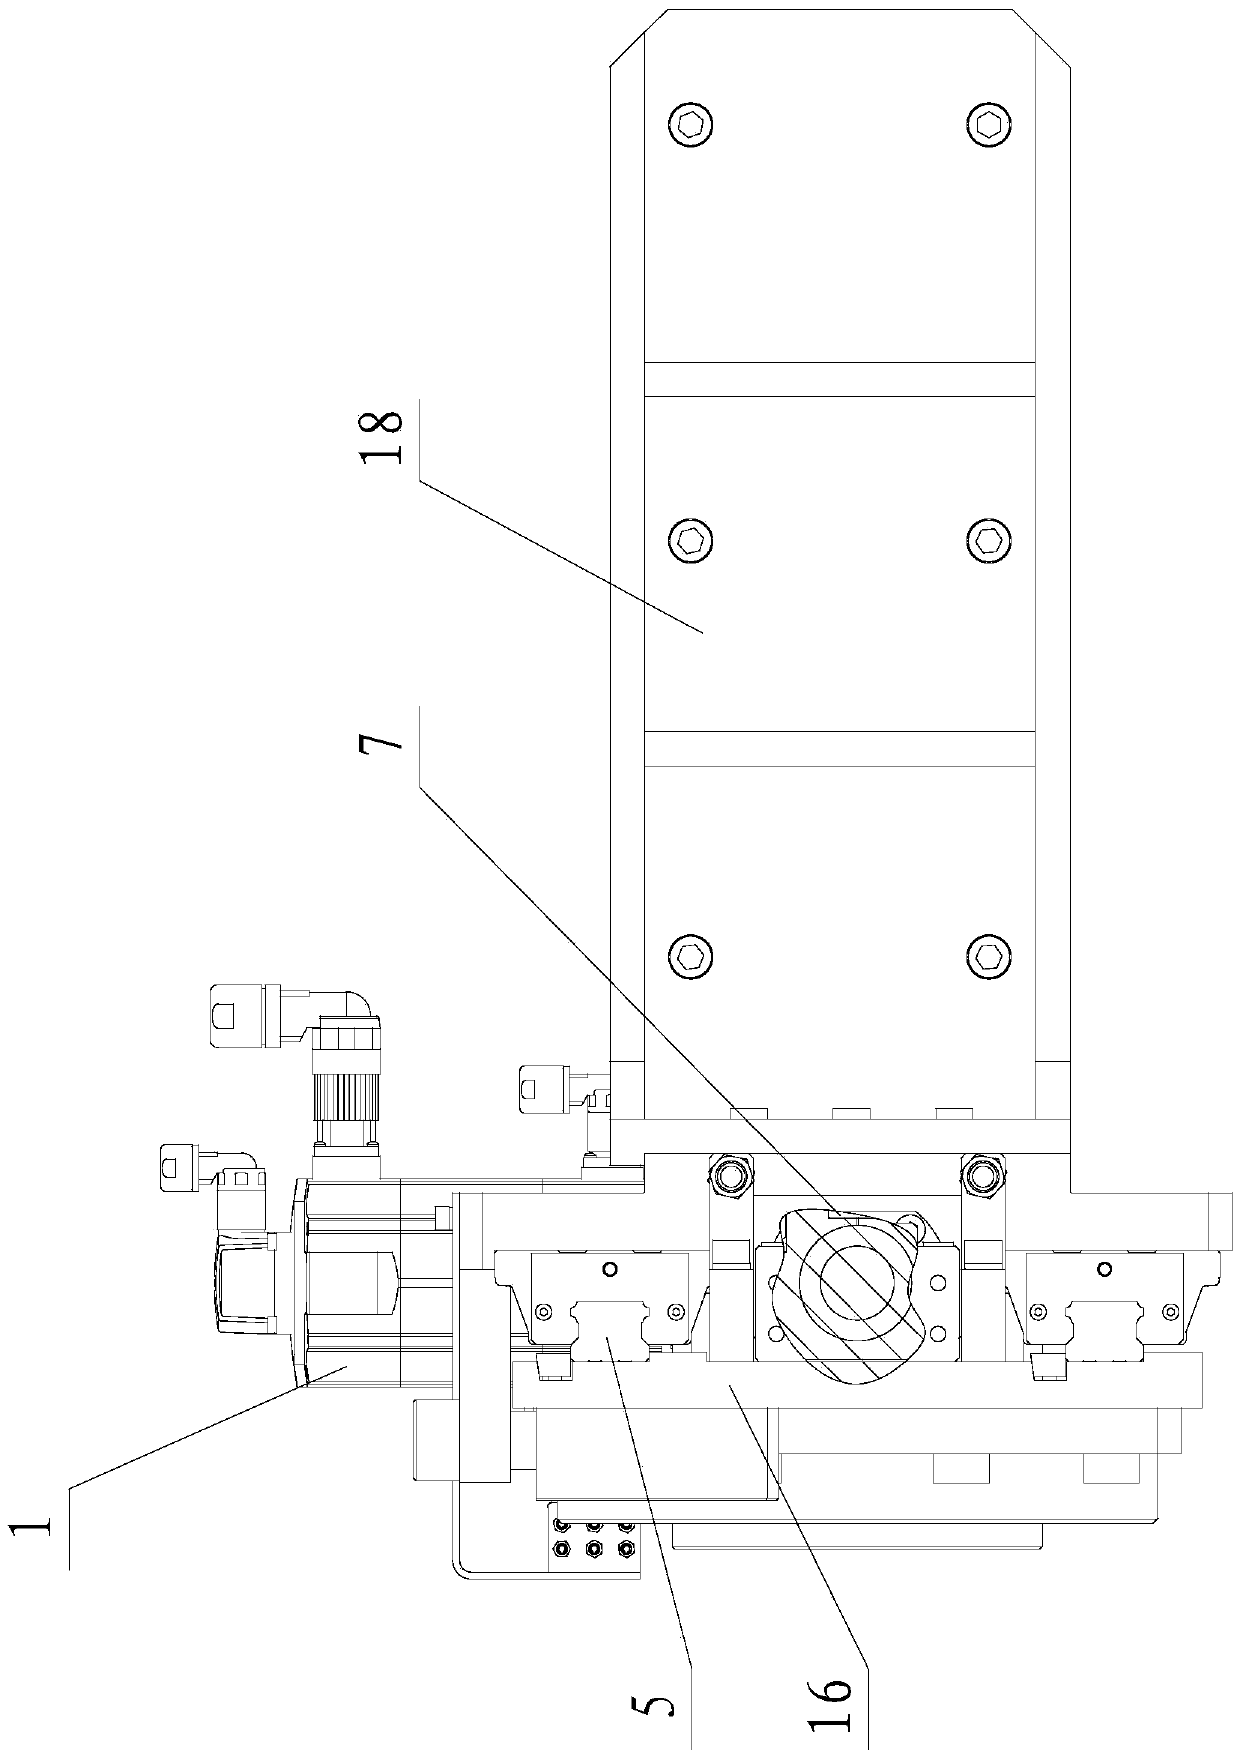 Full-automatic clamping mechanism oriented to large structural part